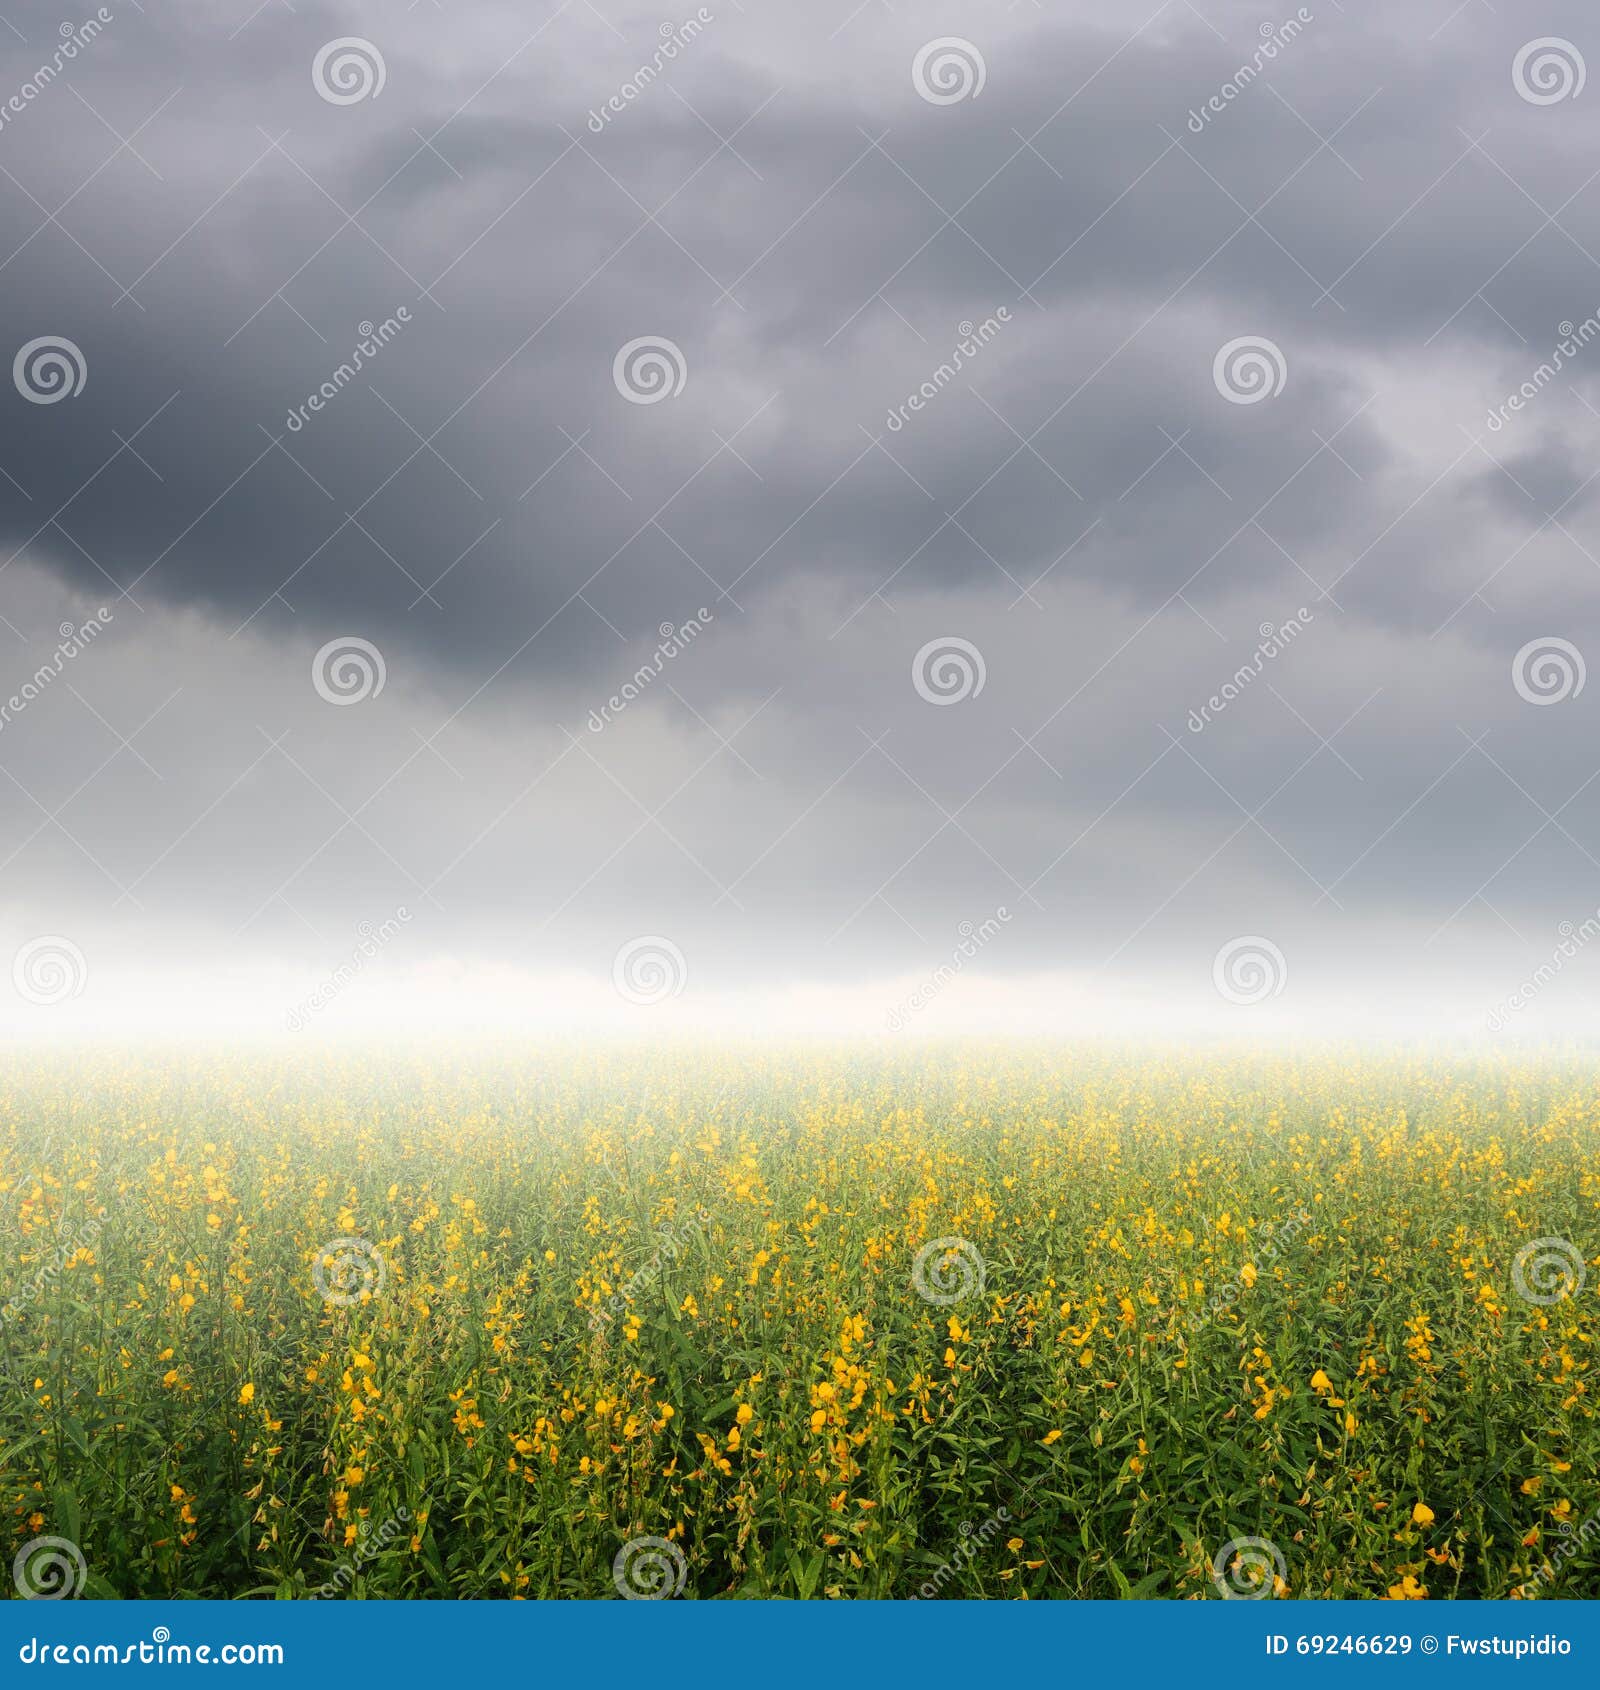 yellow flower fields and rainclouds